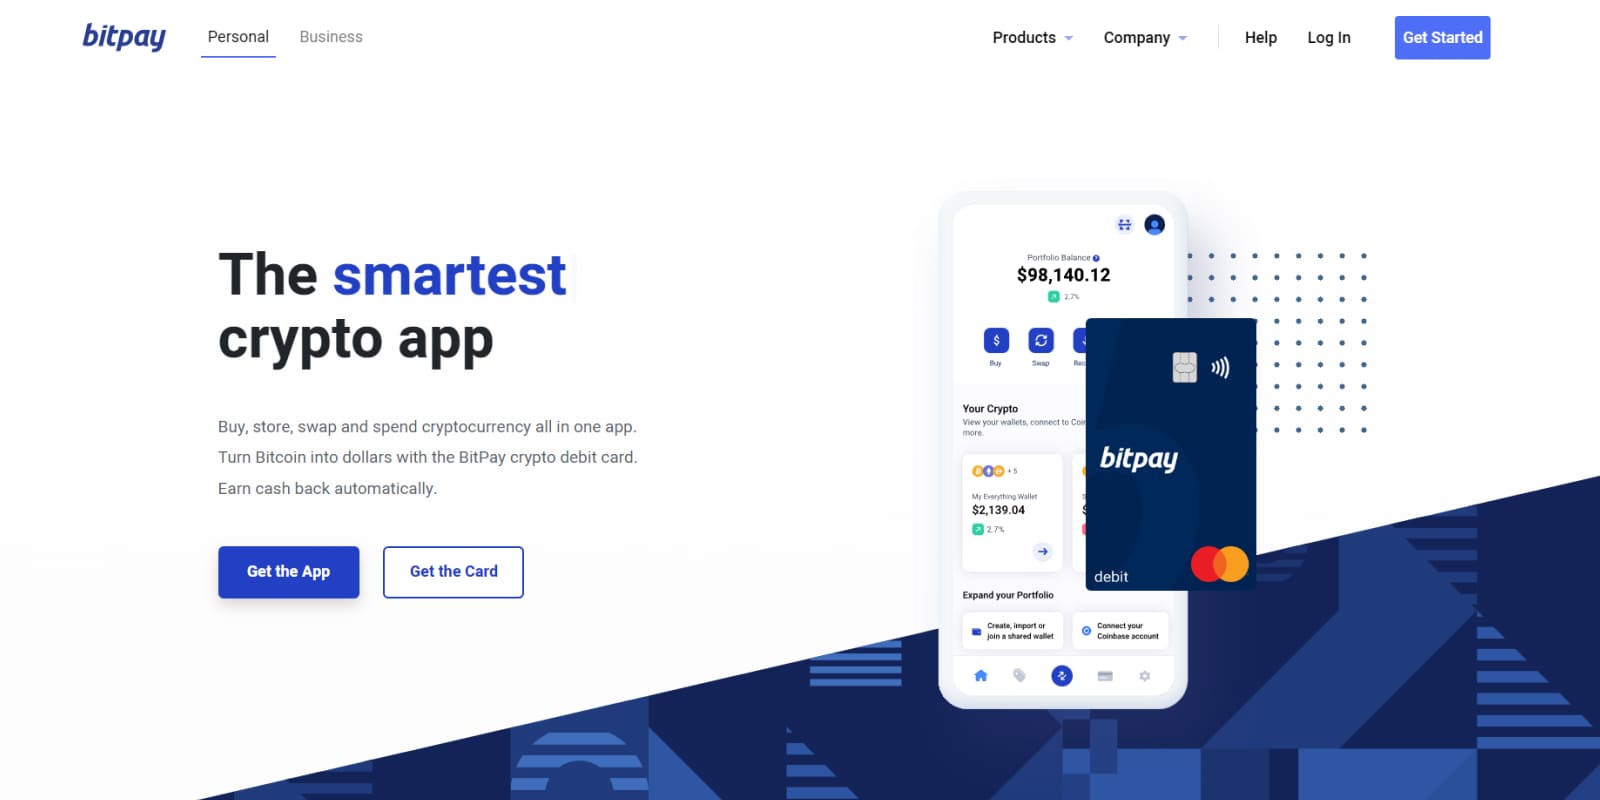 BitPay supports 10+ coins and various crypto wallets, offering easy crypto-to-fiat conversion with a 1% fee.